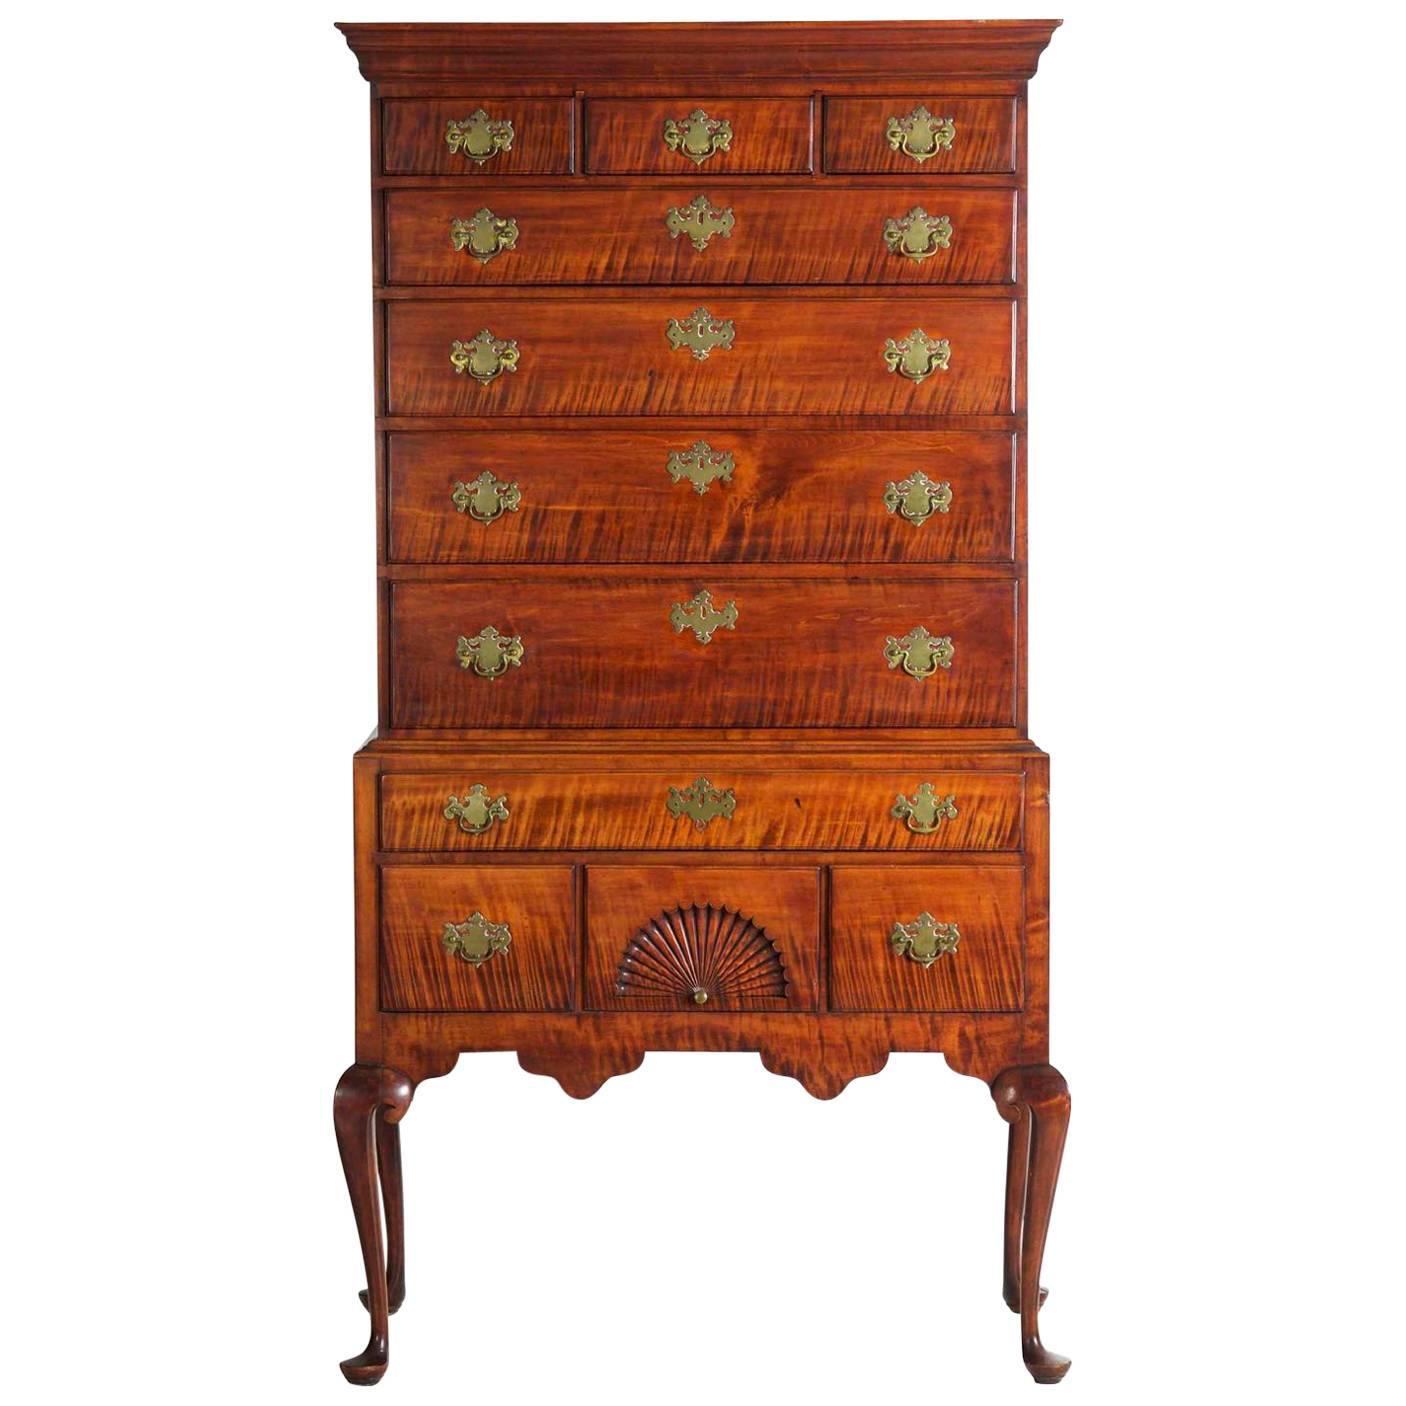 Superb American Queen Anne Curly Maple Highboy Chest of Drawers, circa 1760-1780